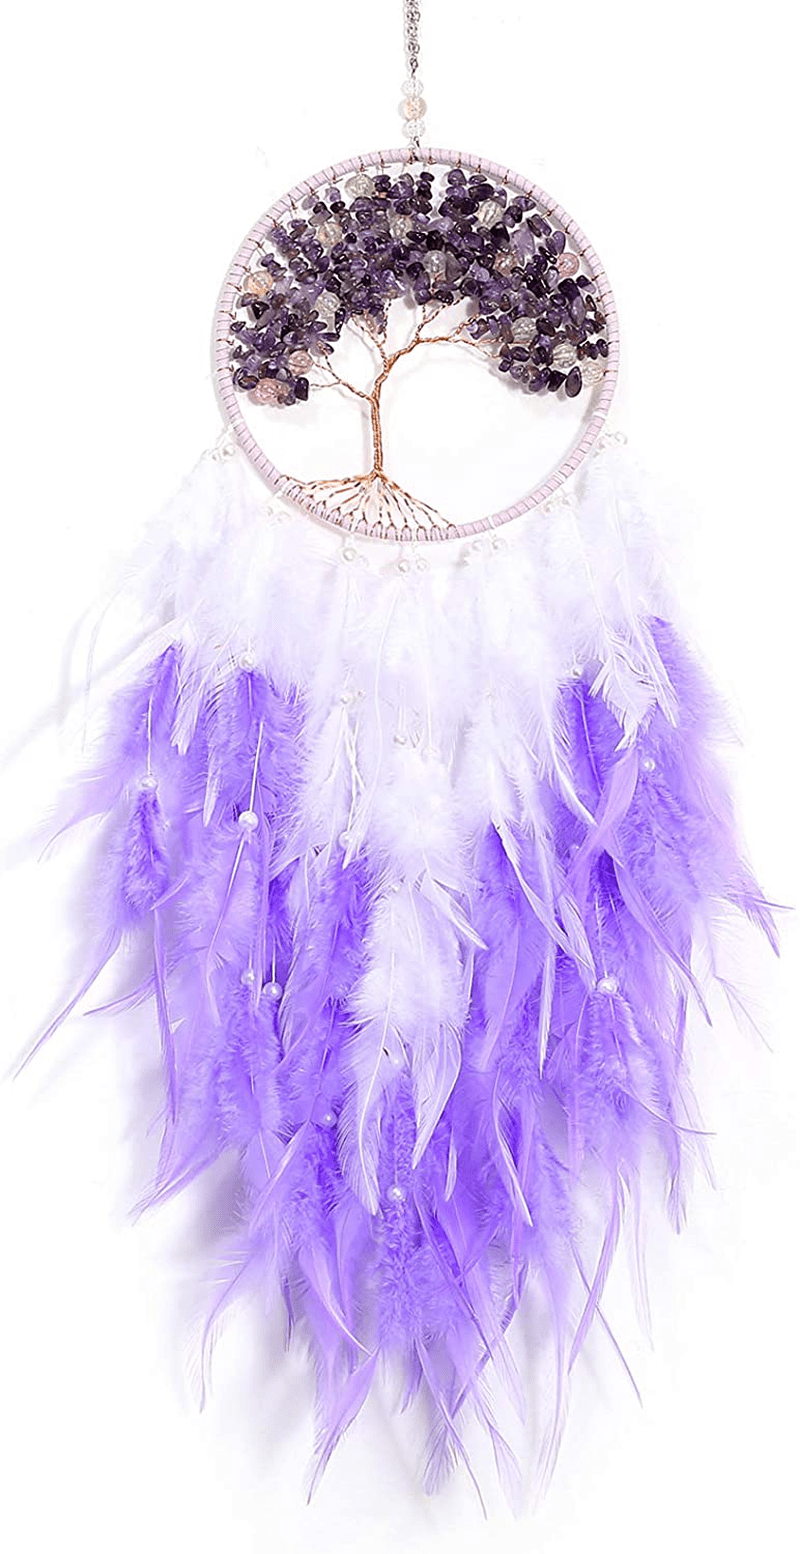 XMSJSIY Tree of Life Dream Catcher,Dream Catcher,Large Handmade Feather Mobile Wall Hanging Decor for Bedroom Dorm Room Decorations Home Ornament Birthday Festival Craft Gift (Purple) Home & Garden > Decor > Seasonal & Holiday Decorations& Garden > Decor > Seasonal & Holiday Decorations XMSJSIY Purple  